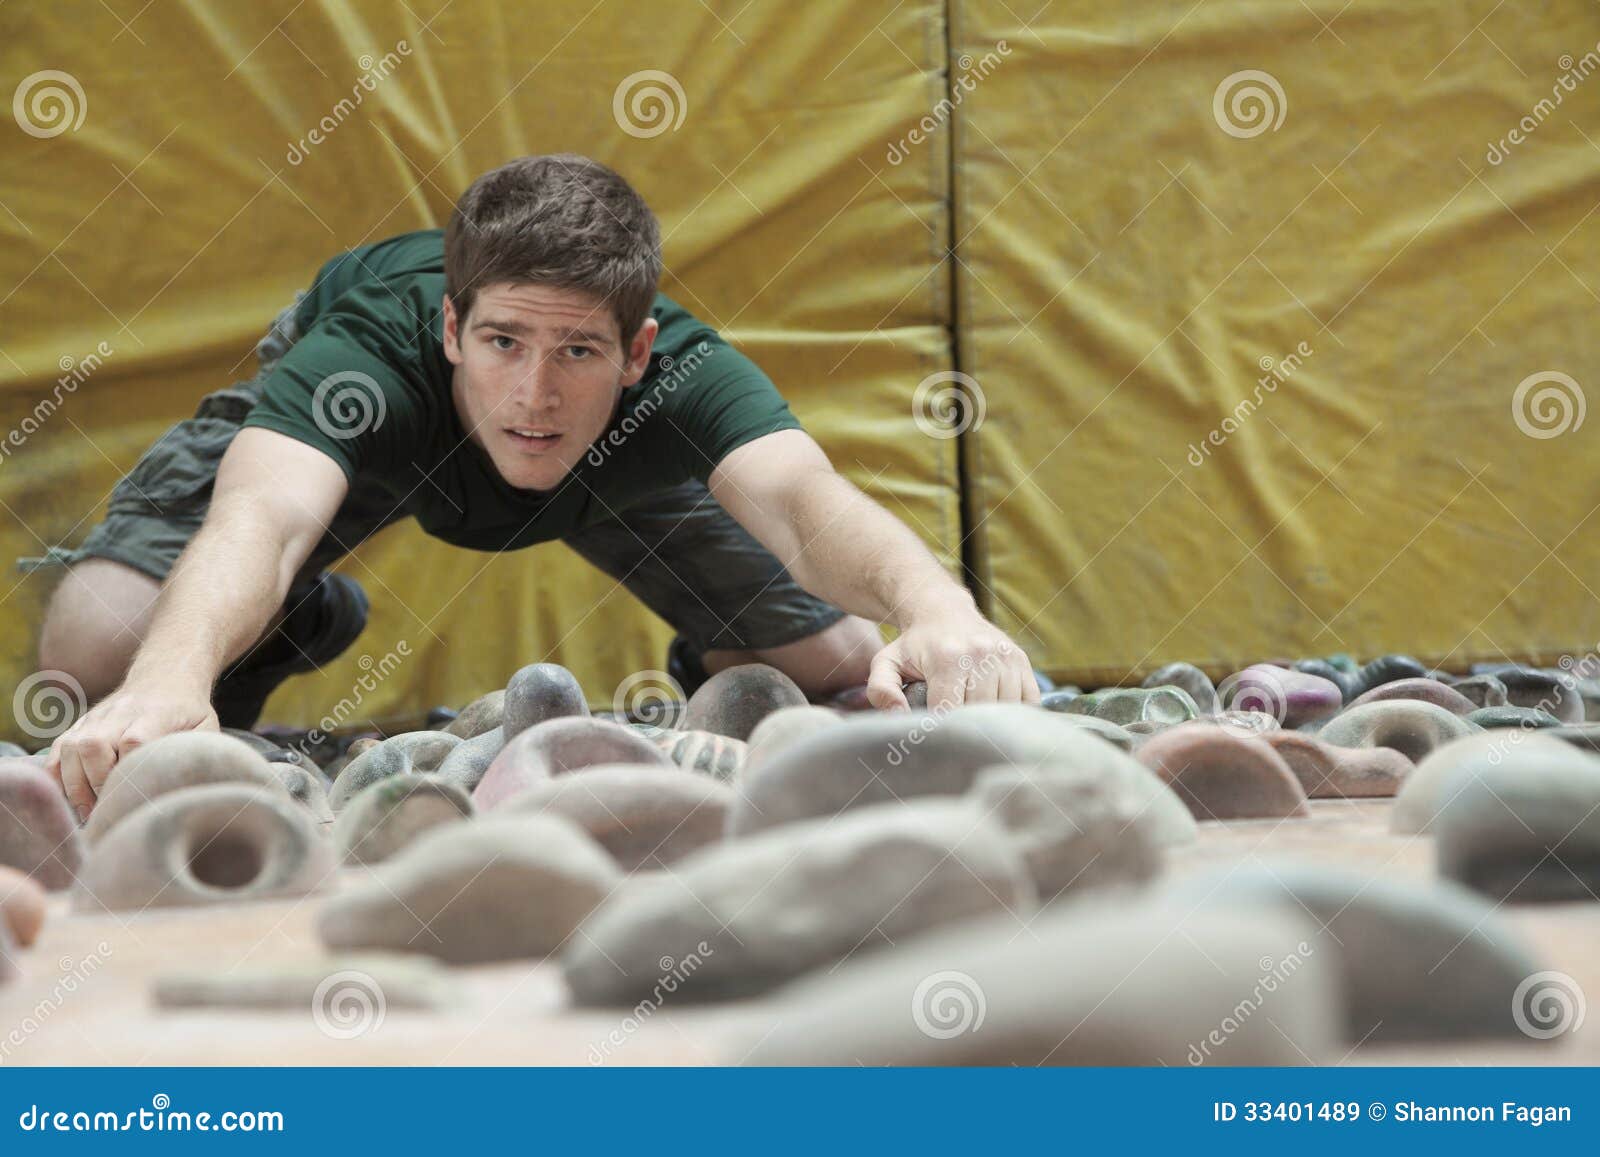 determined young man climbing up a climbing wall in an indoor climbing gym, directly above